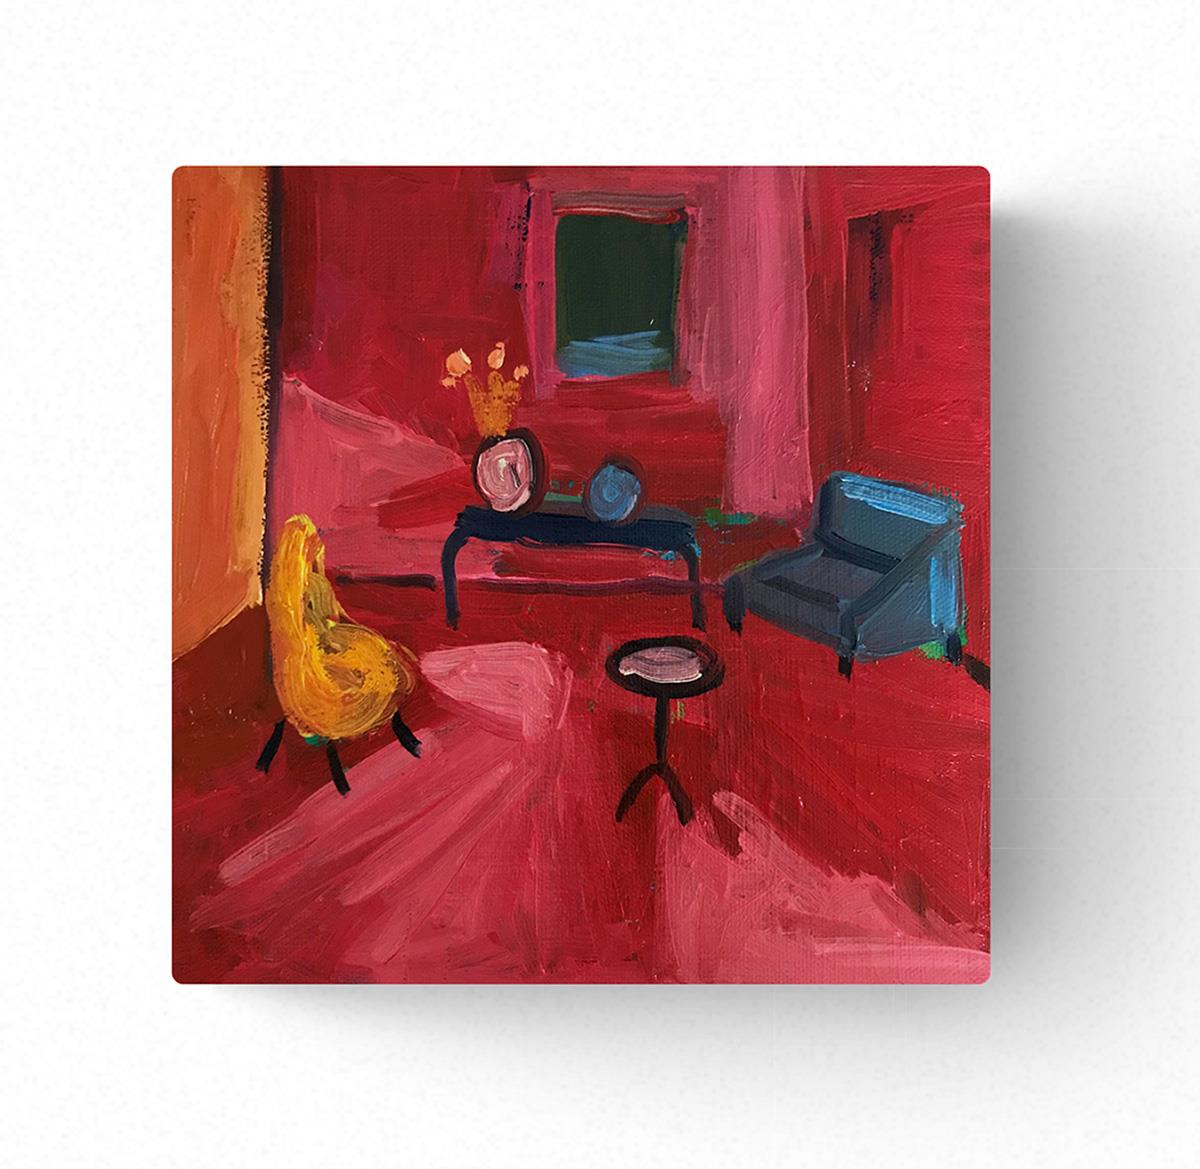 small painting of a living room interior with red walls